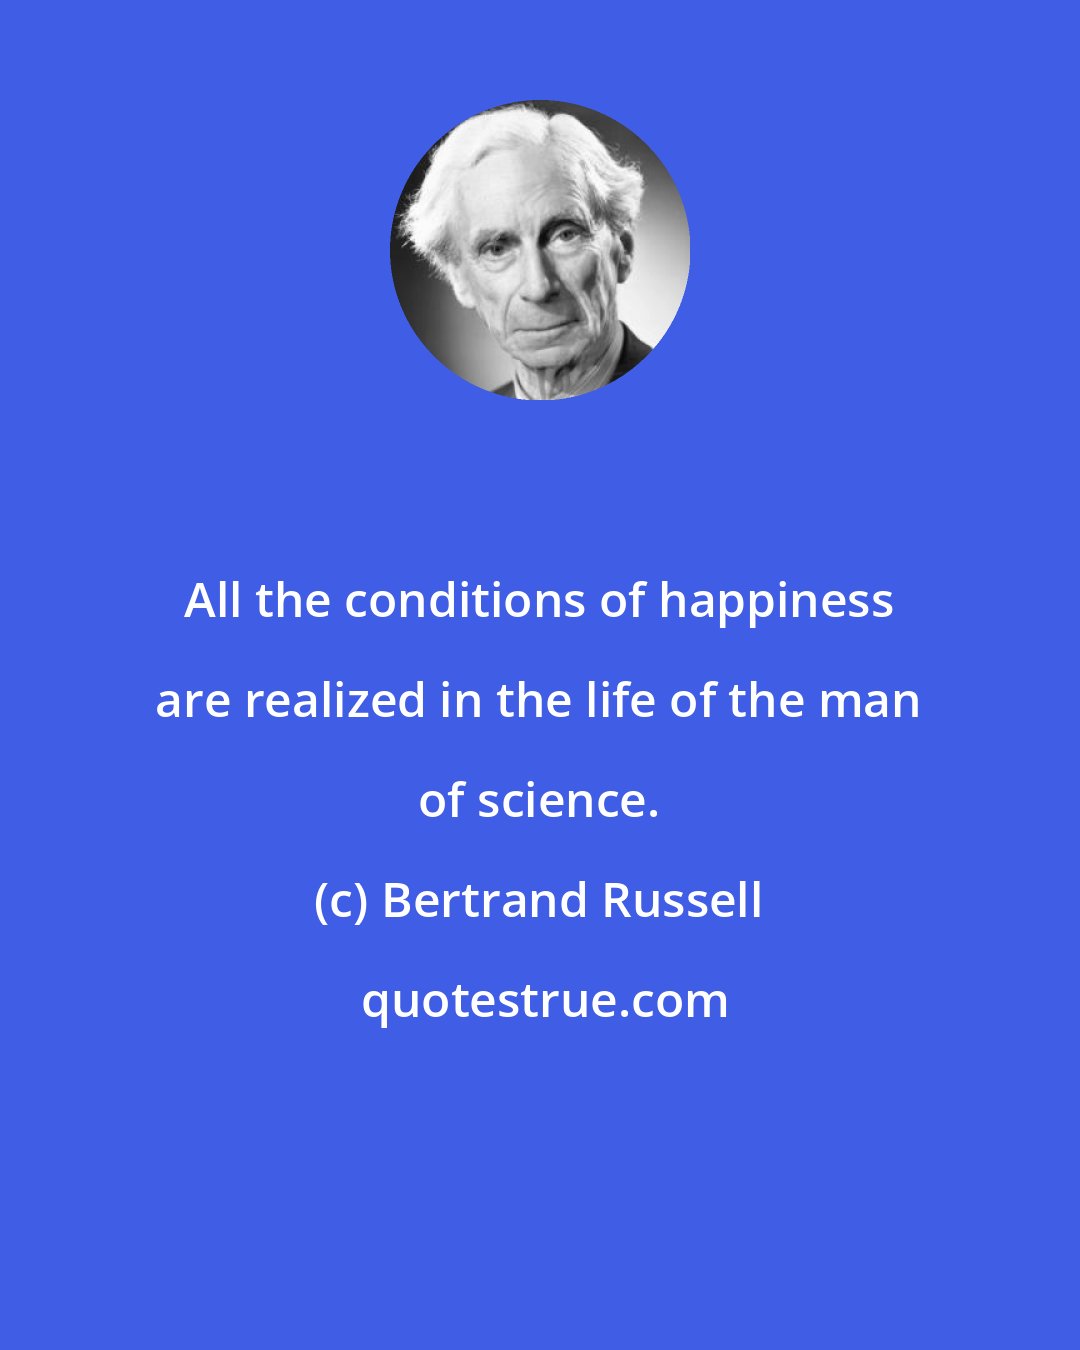 Bertrand Russell: All the conditions of happiness are realized in the life of the man of science.